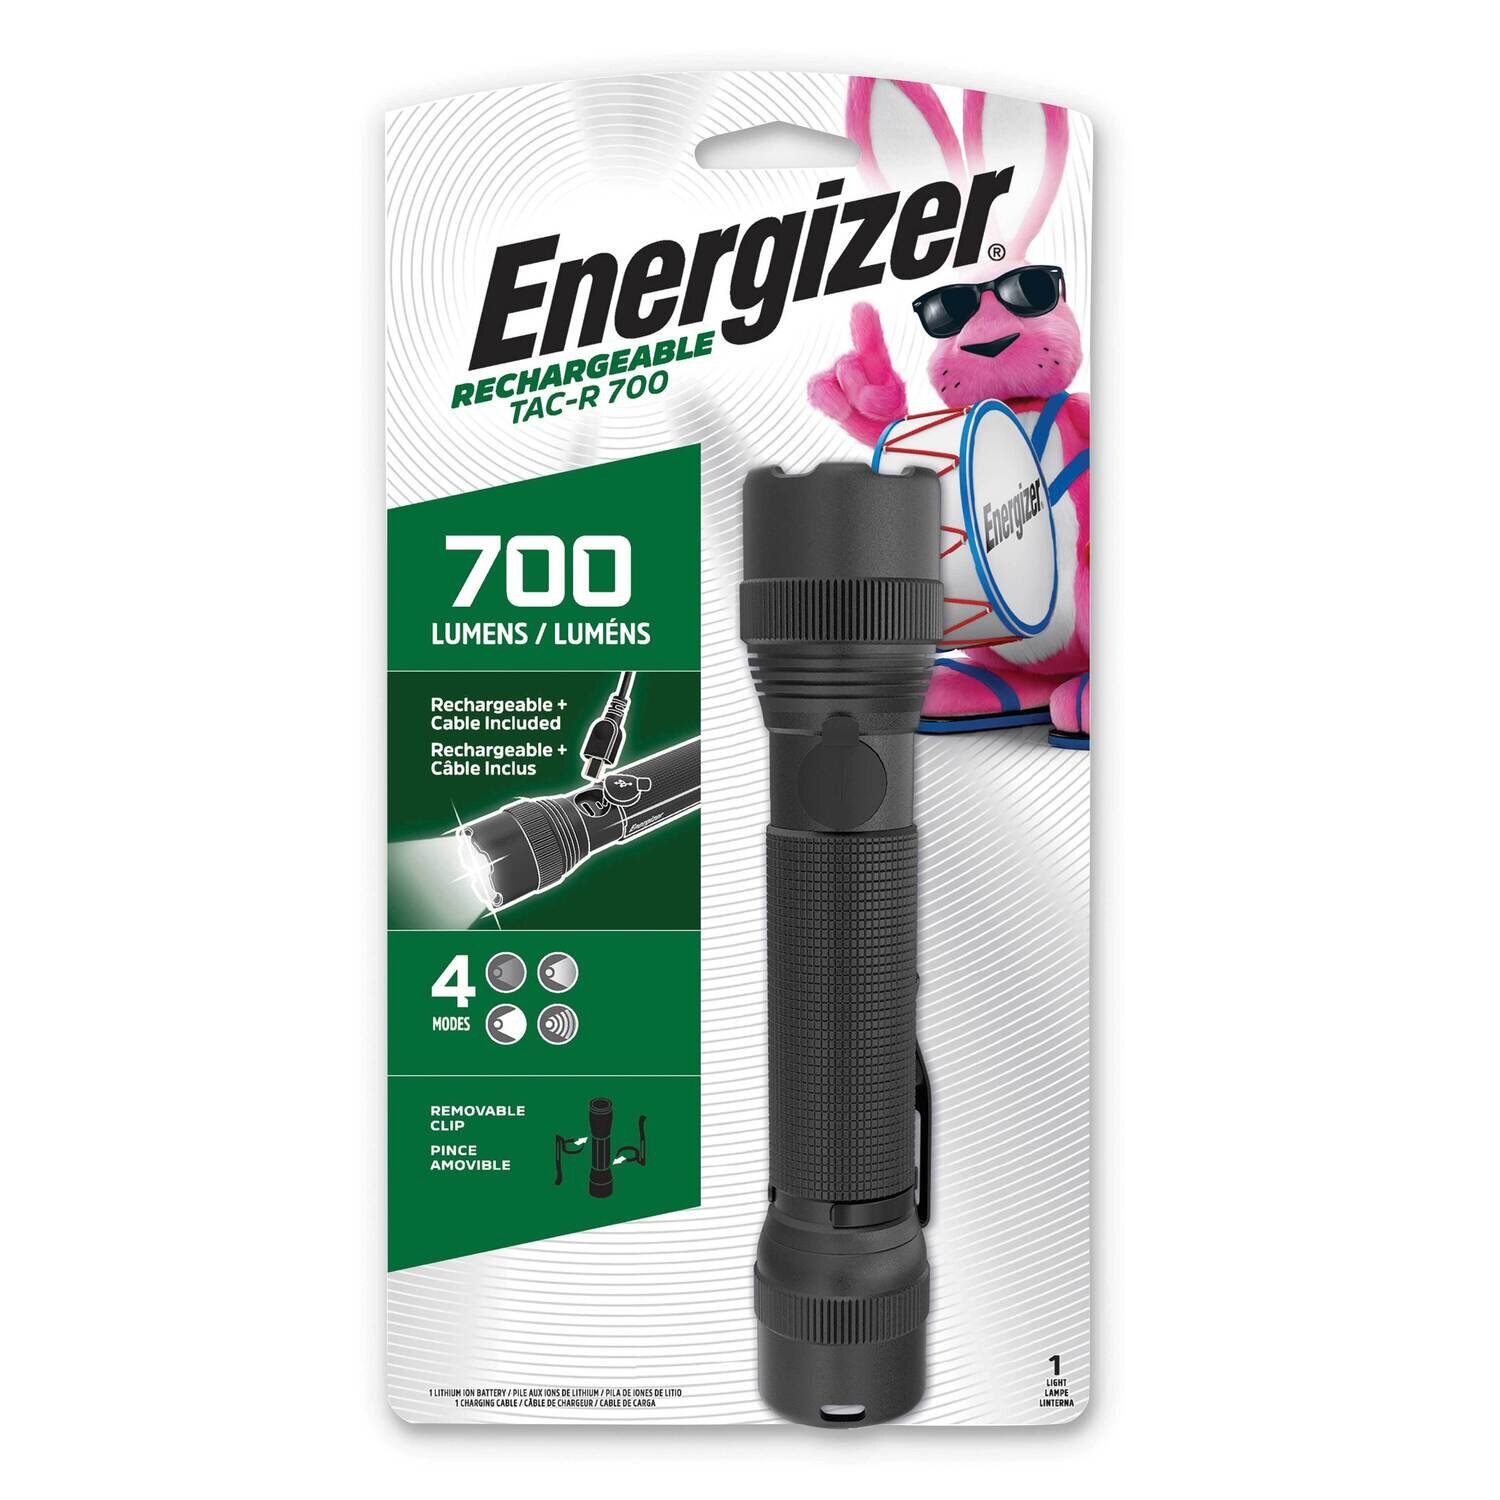 Energizer Rechargeable Tactical Flashlight with two USB ports JT5339